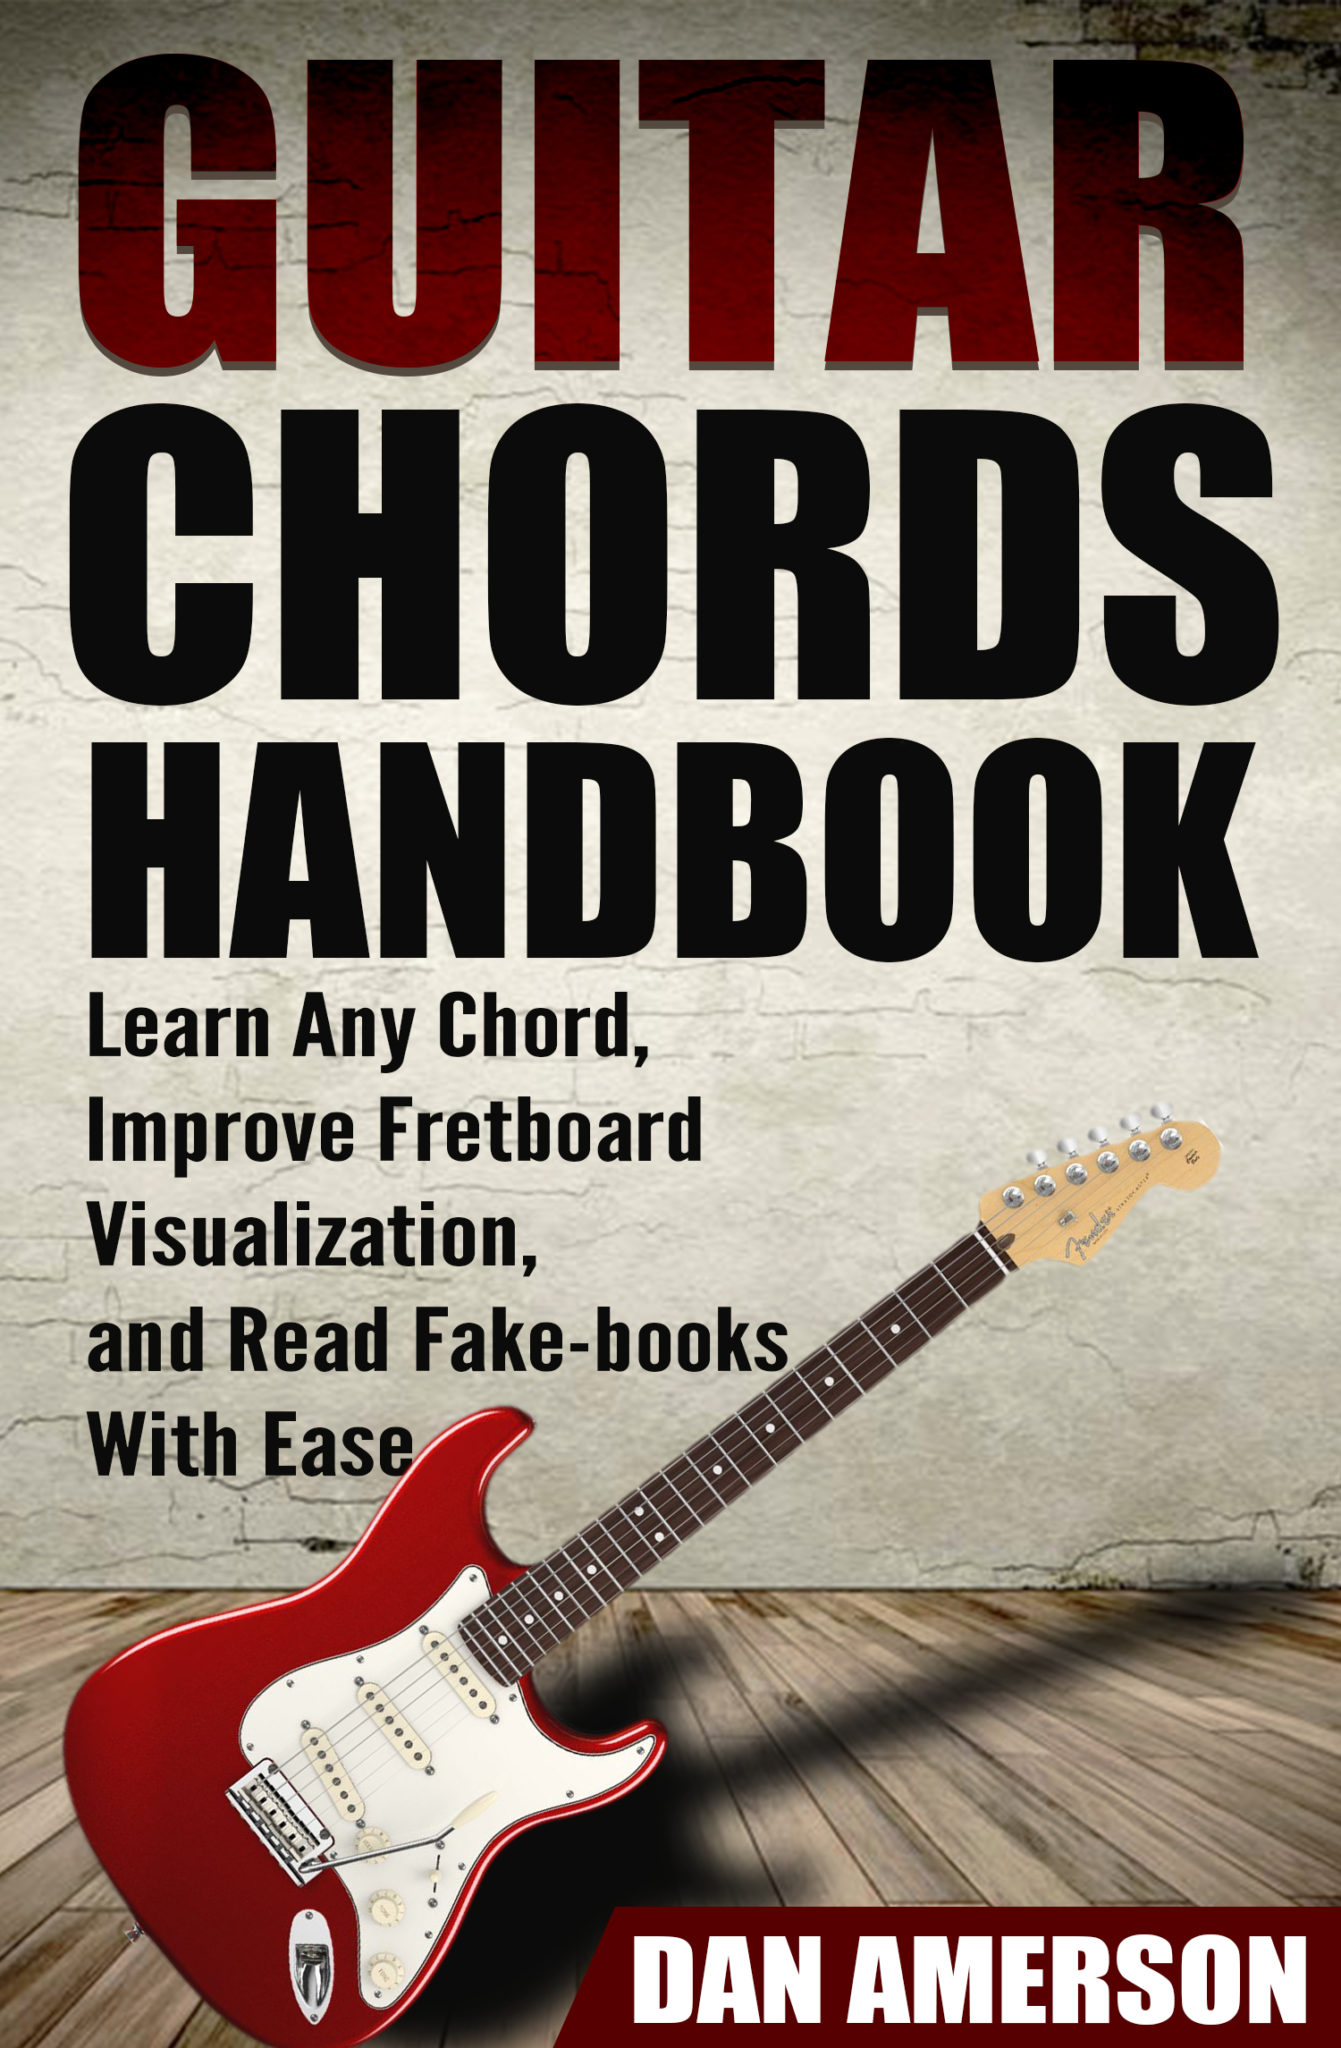 FREE: Guitar Chords Handbook: Learn Any Chord, Improve Fretboard Visualization, and Read Fake-Books With Ease by Dan Amerson